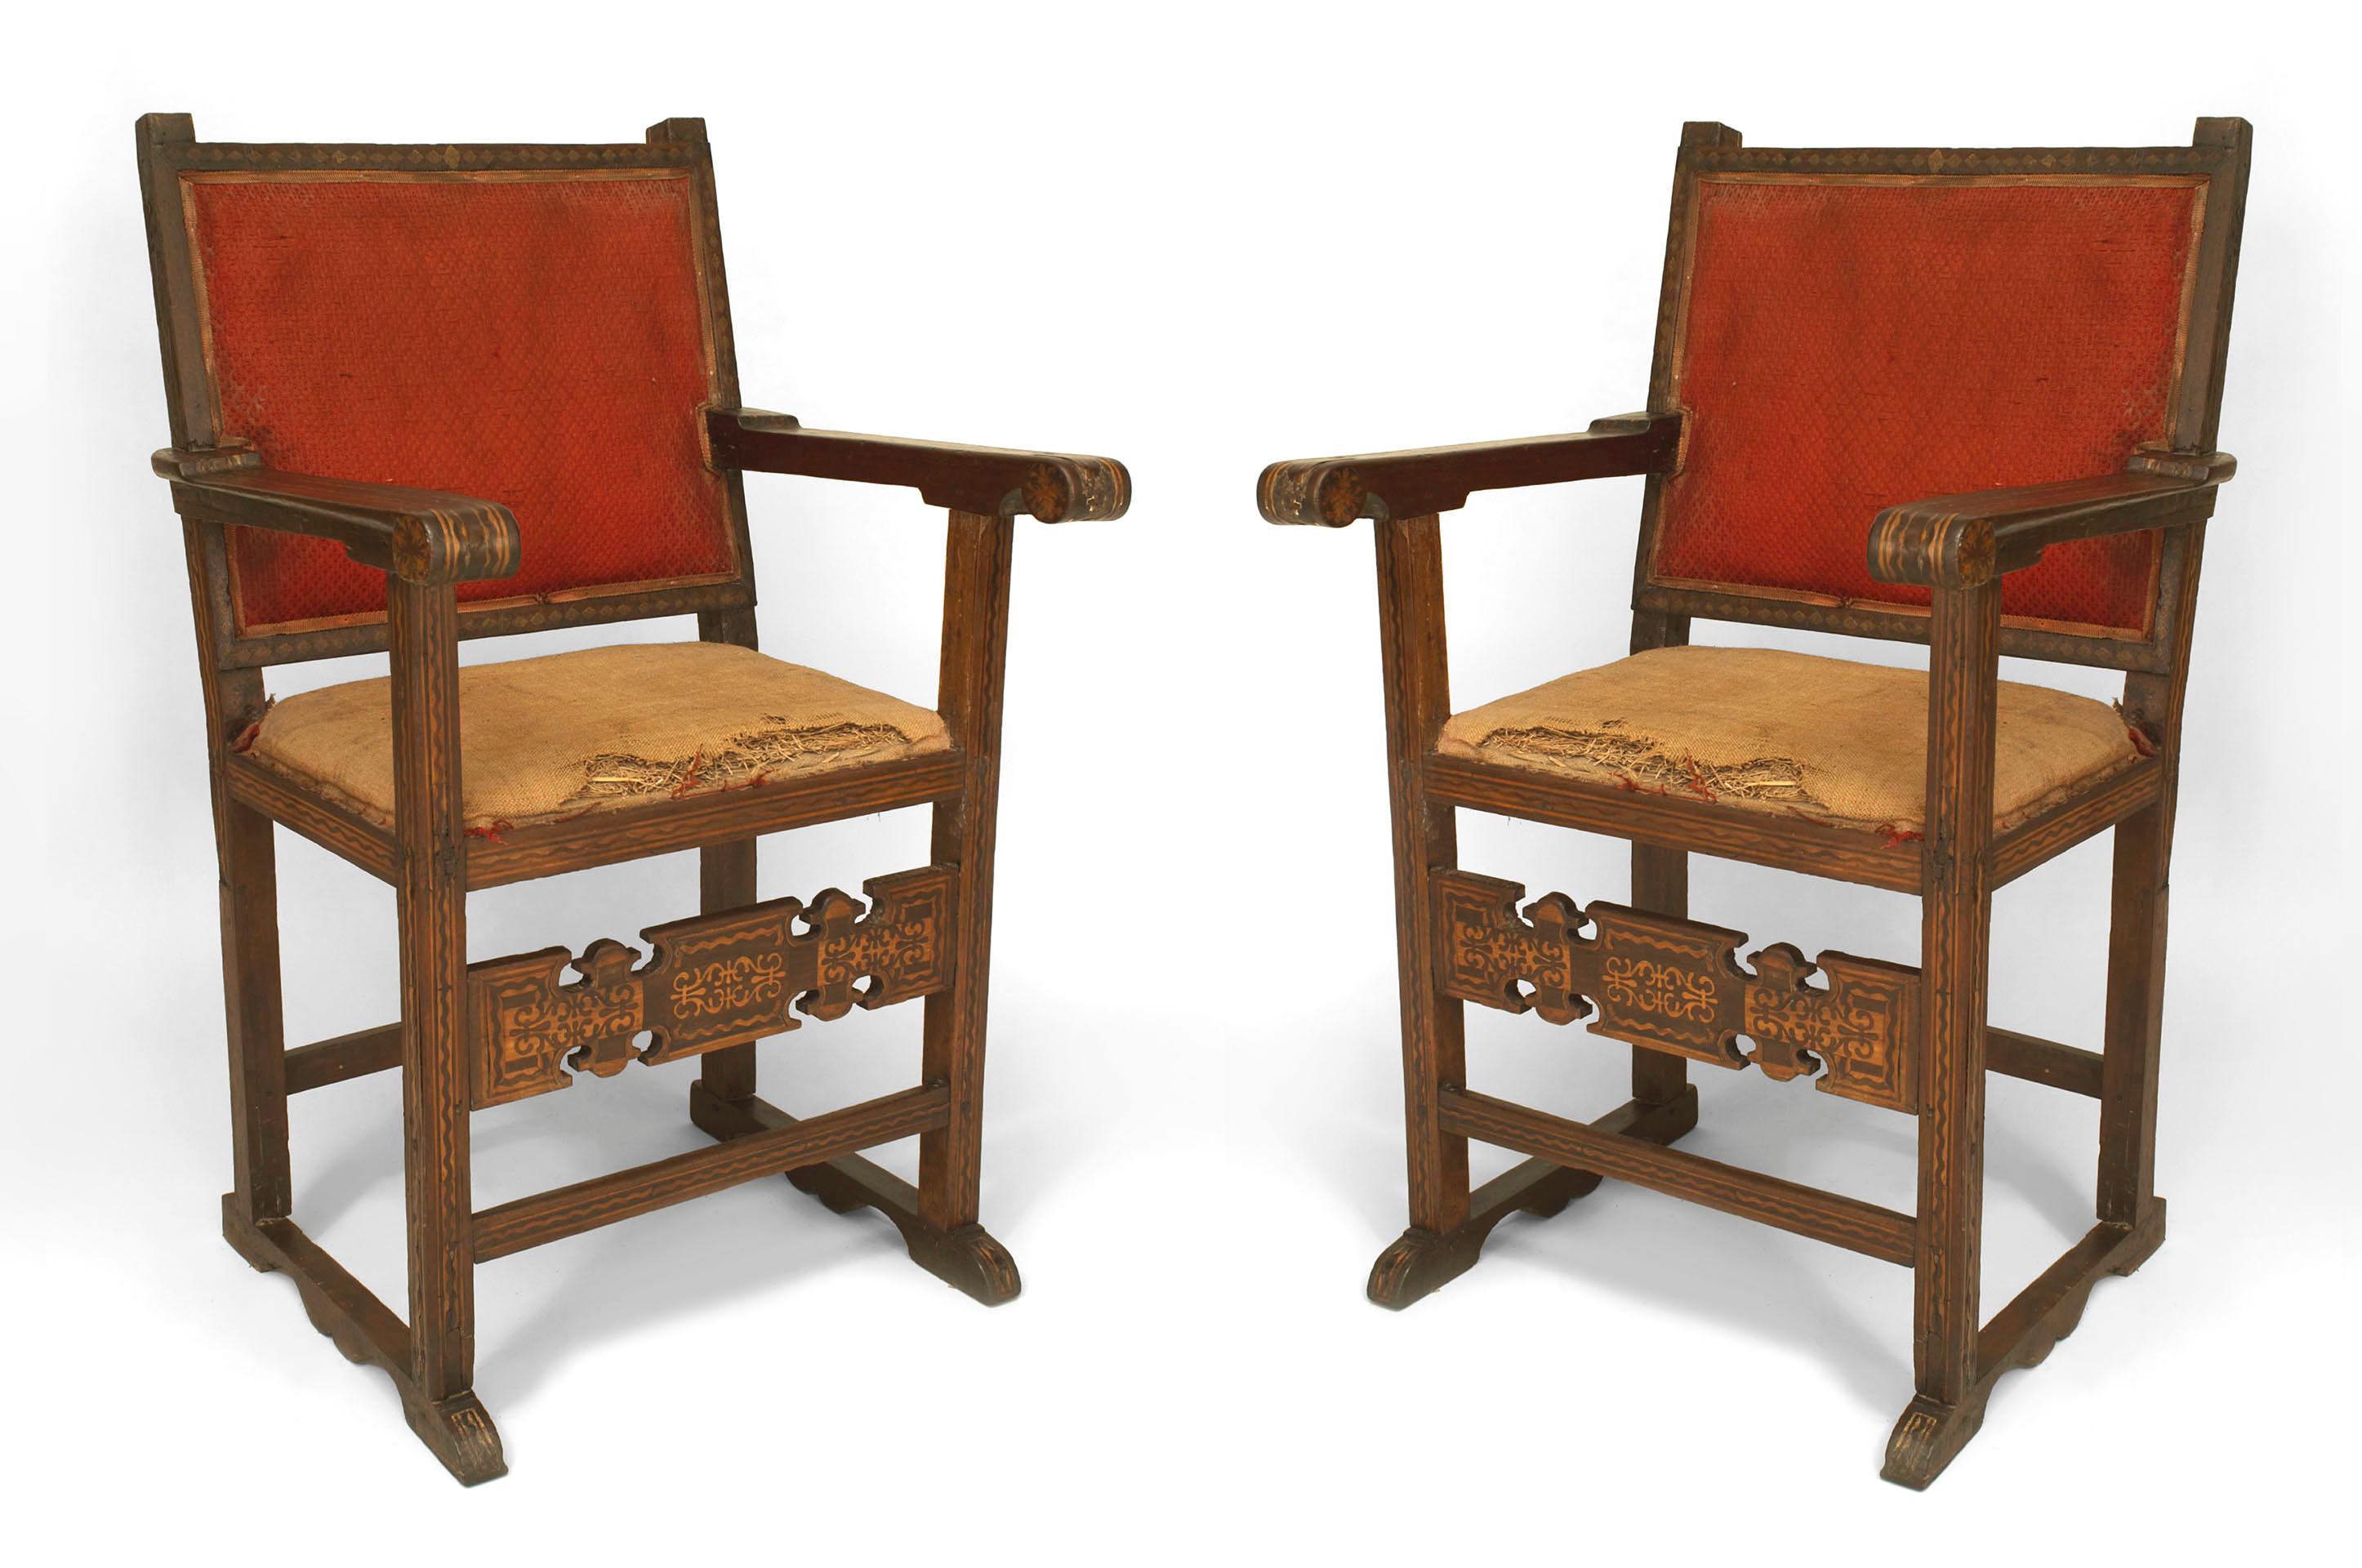 Pair of Spanish Colonial (South American possibly 16th Cent) walnut Armchairs with a square back and from stretcher with a geometric inlaid design.
